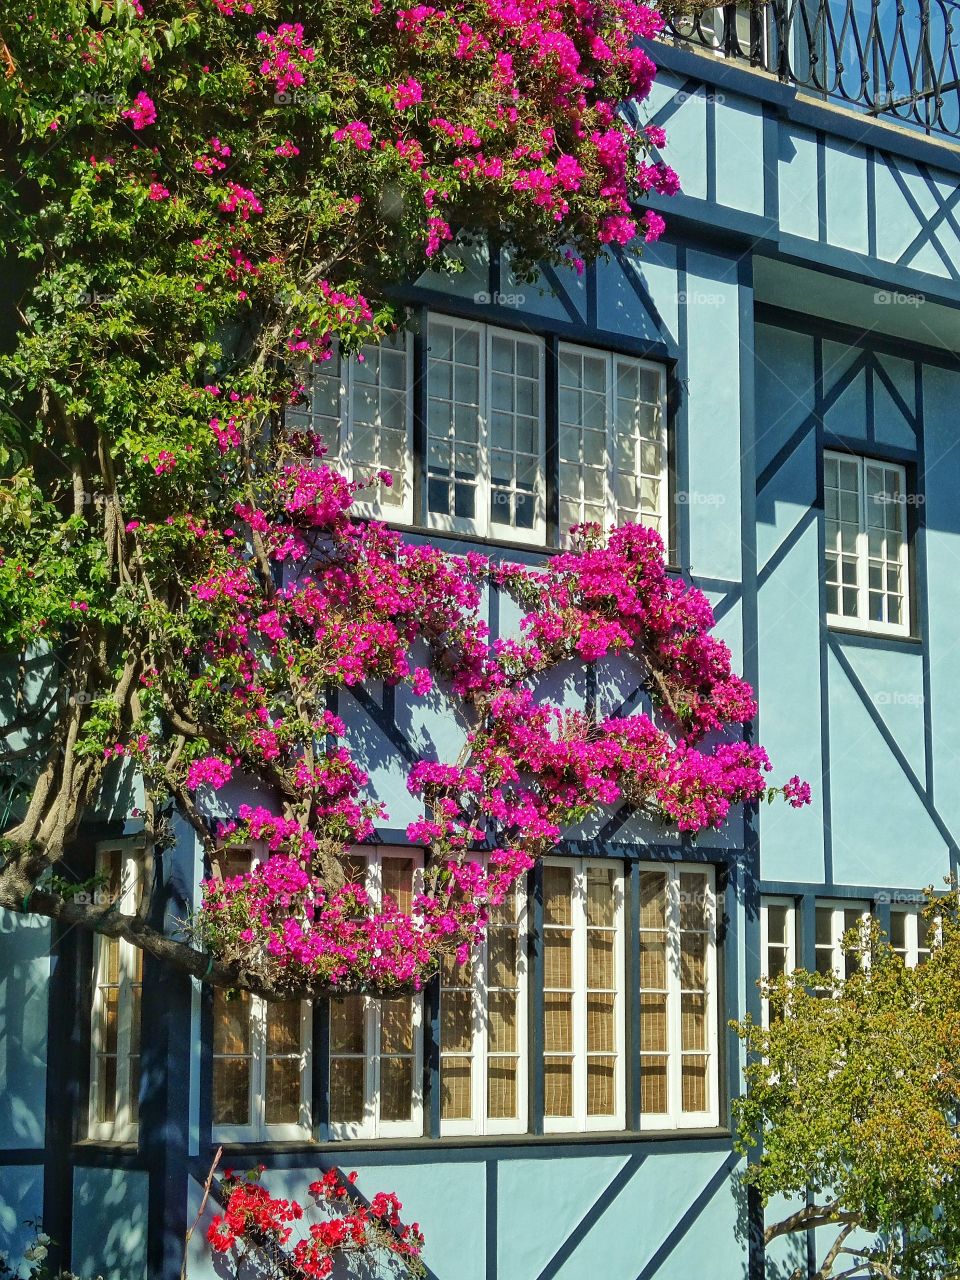 Flowering Climbing Vines. Brilliant Bougainvillia Vines Blossoming On A Home Facade
